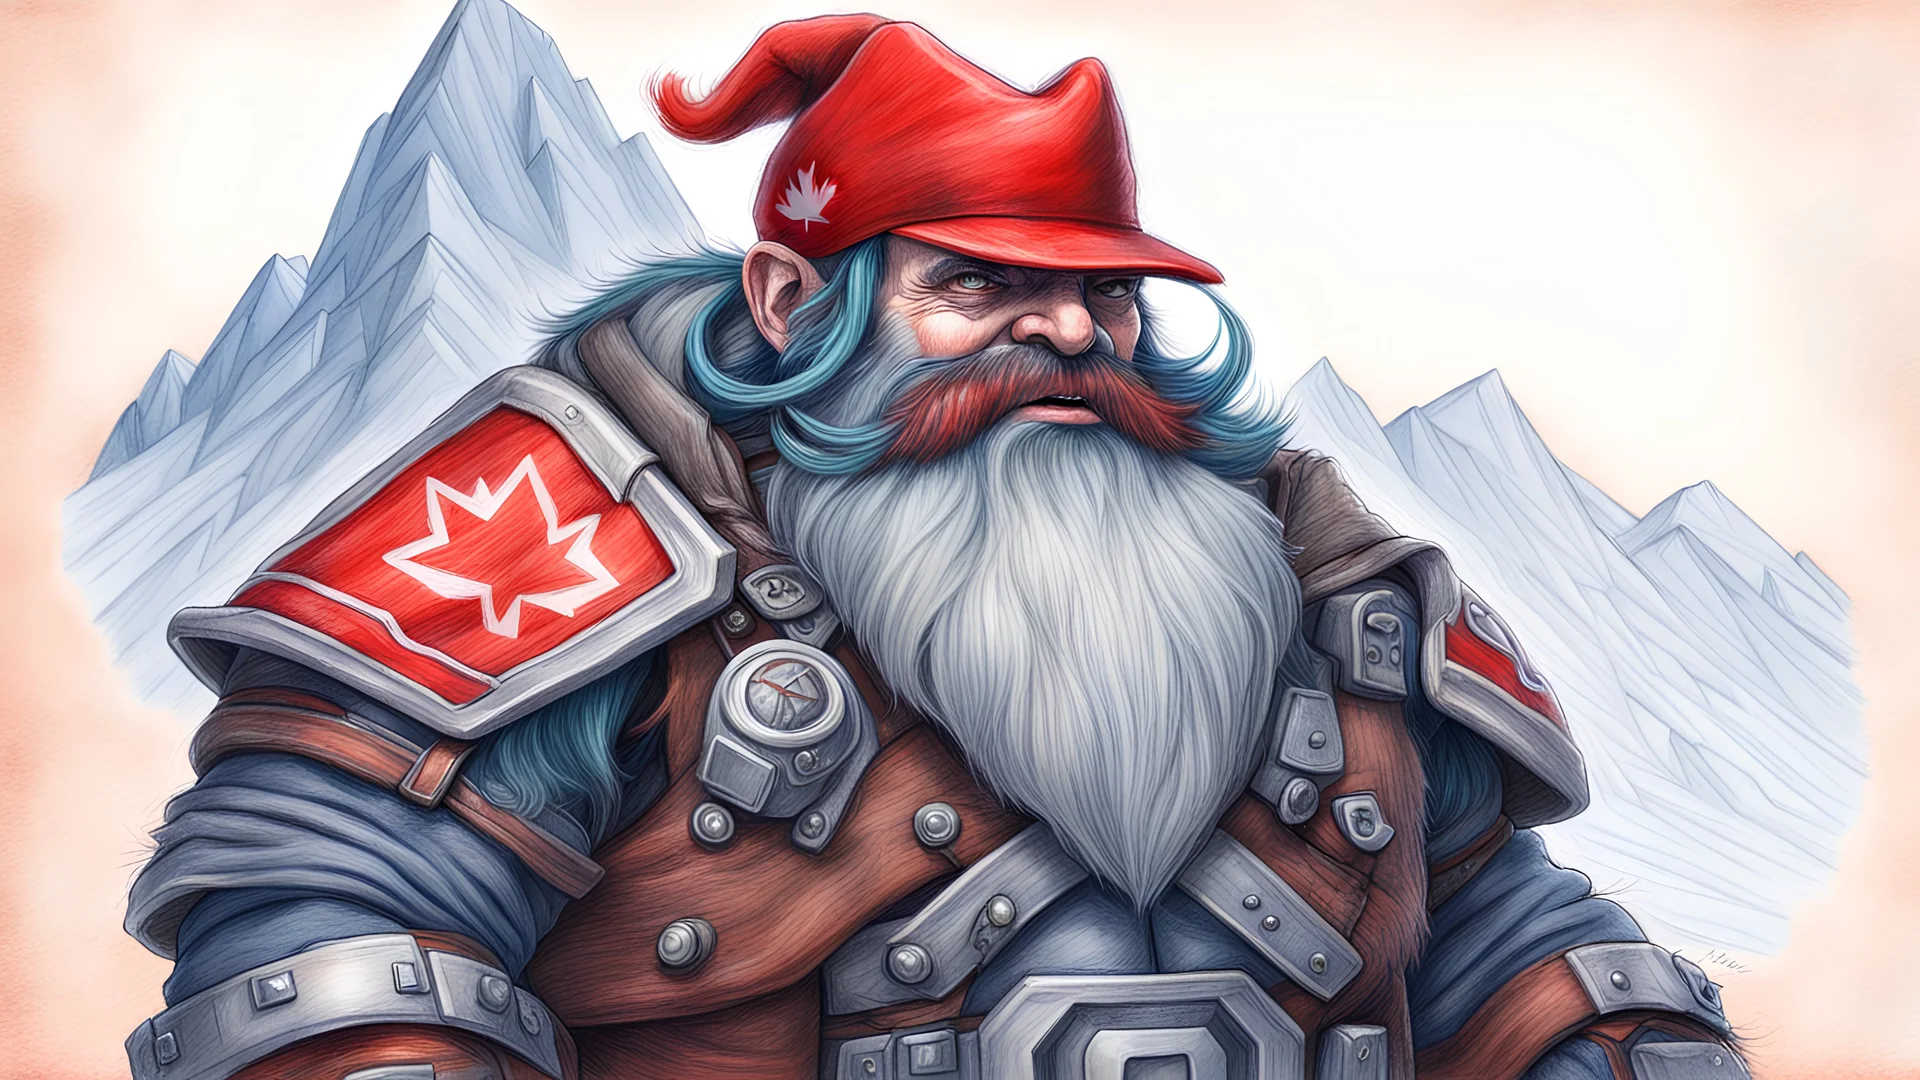 Coloured Pencil sketch of a Cyber hacker Mountain Dwarf with Epic Canadian Pride! More Canada.